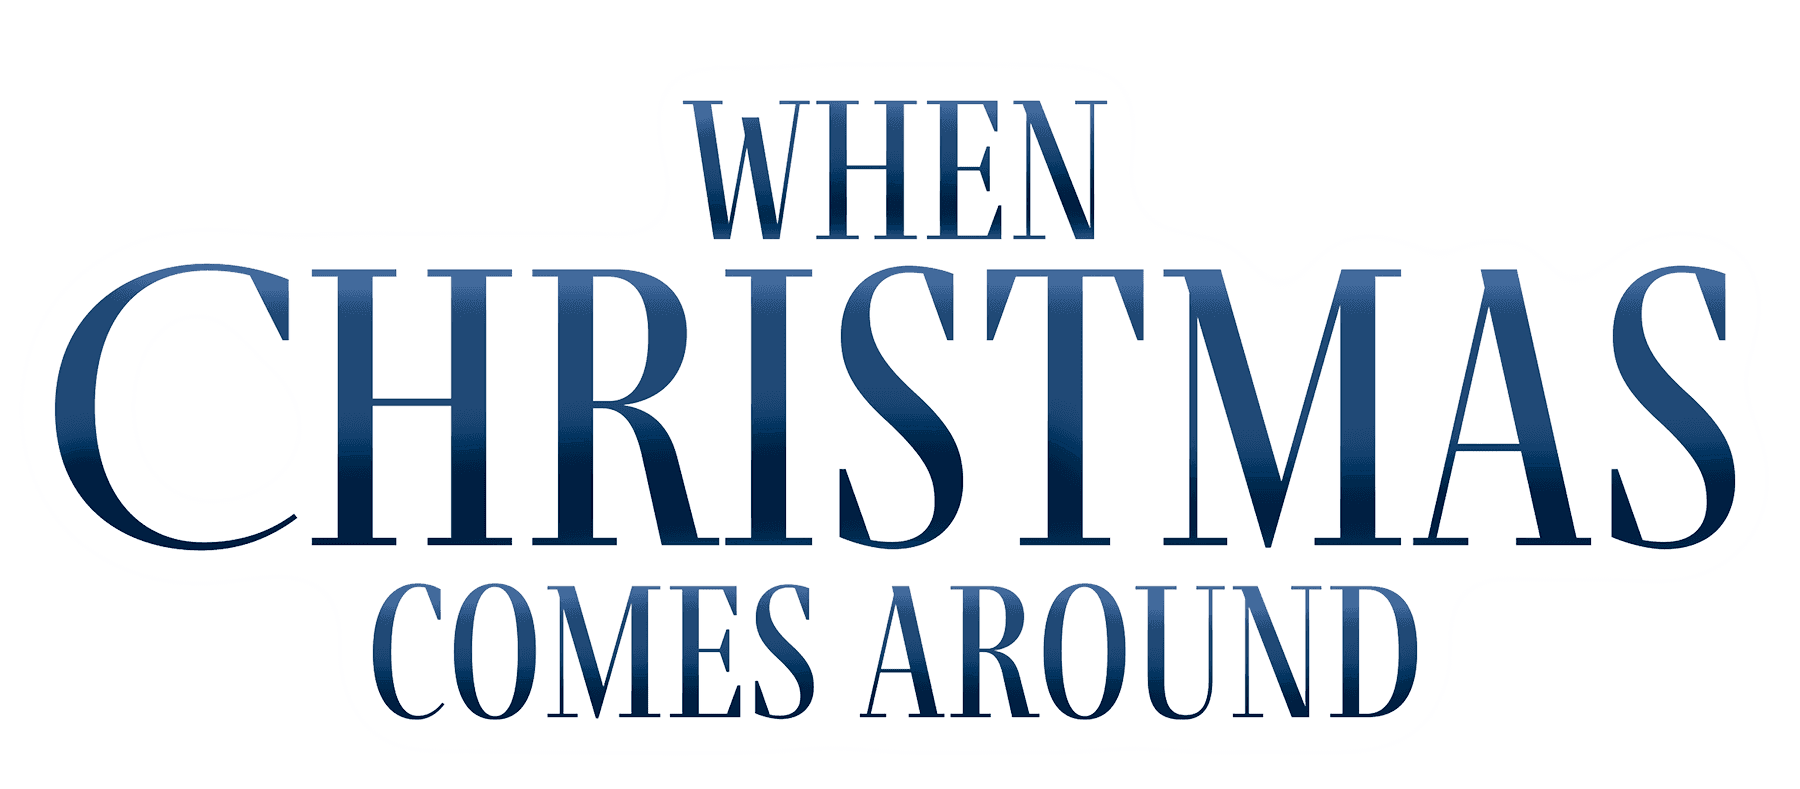 Kelly Clarkson Presents: When Christmas Comes Around logo